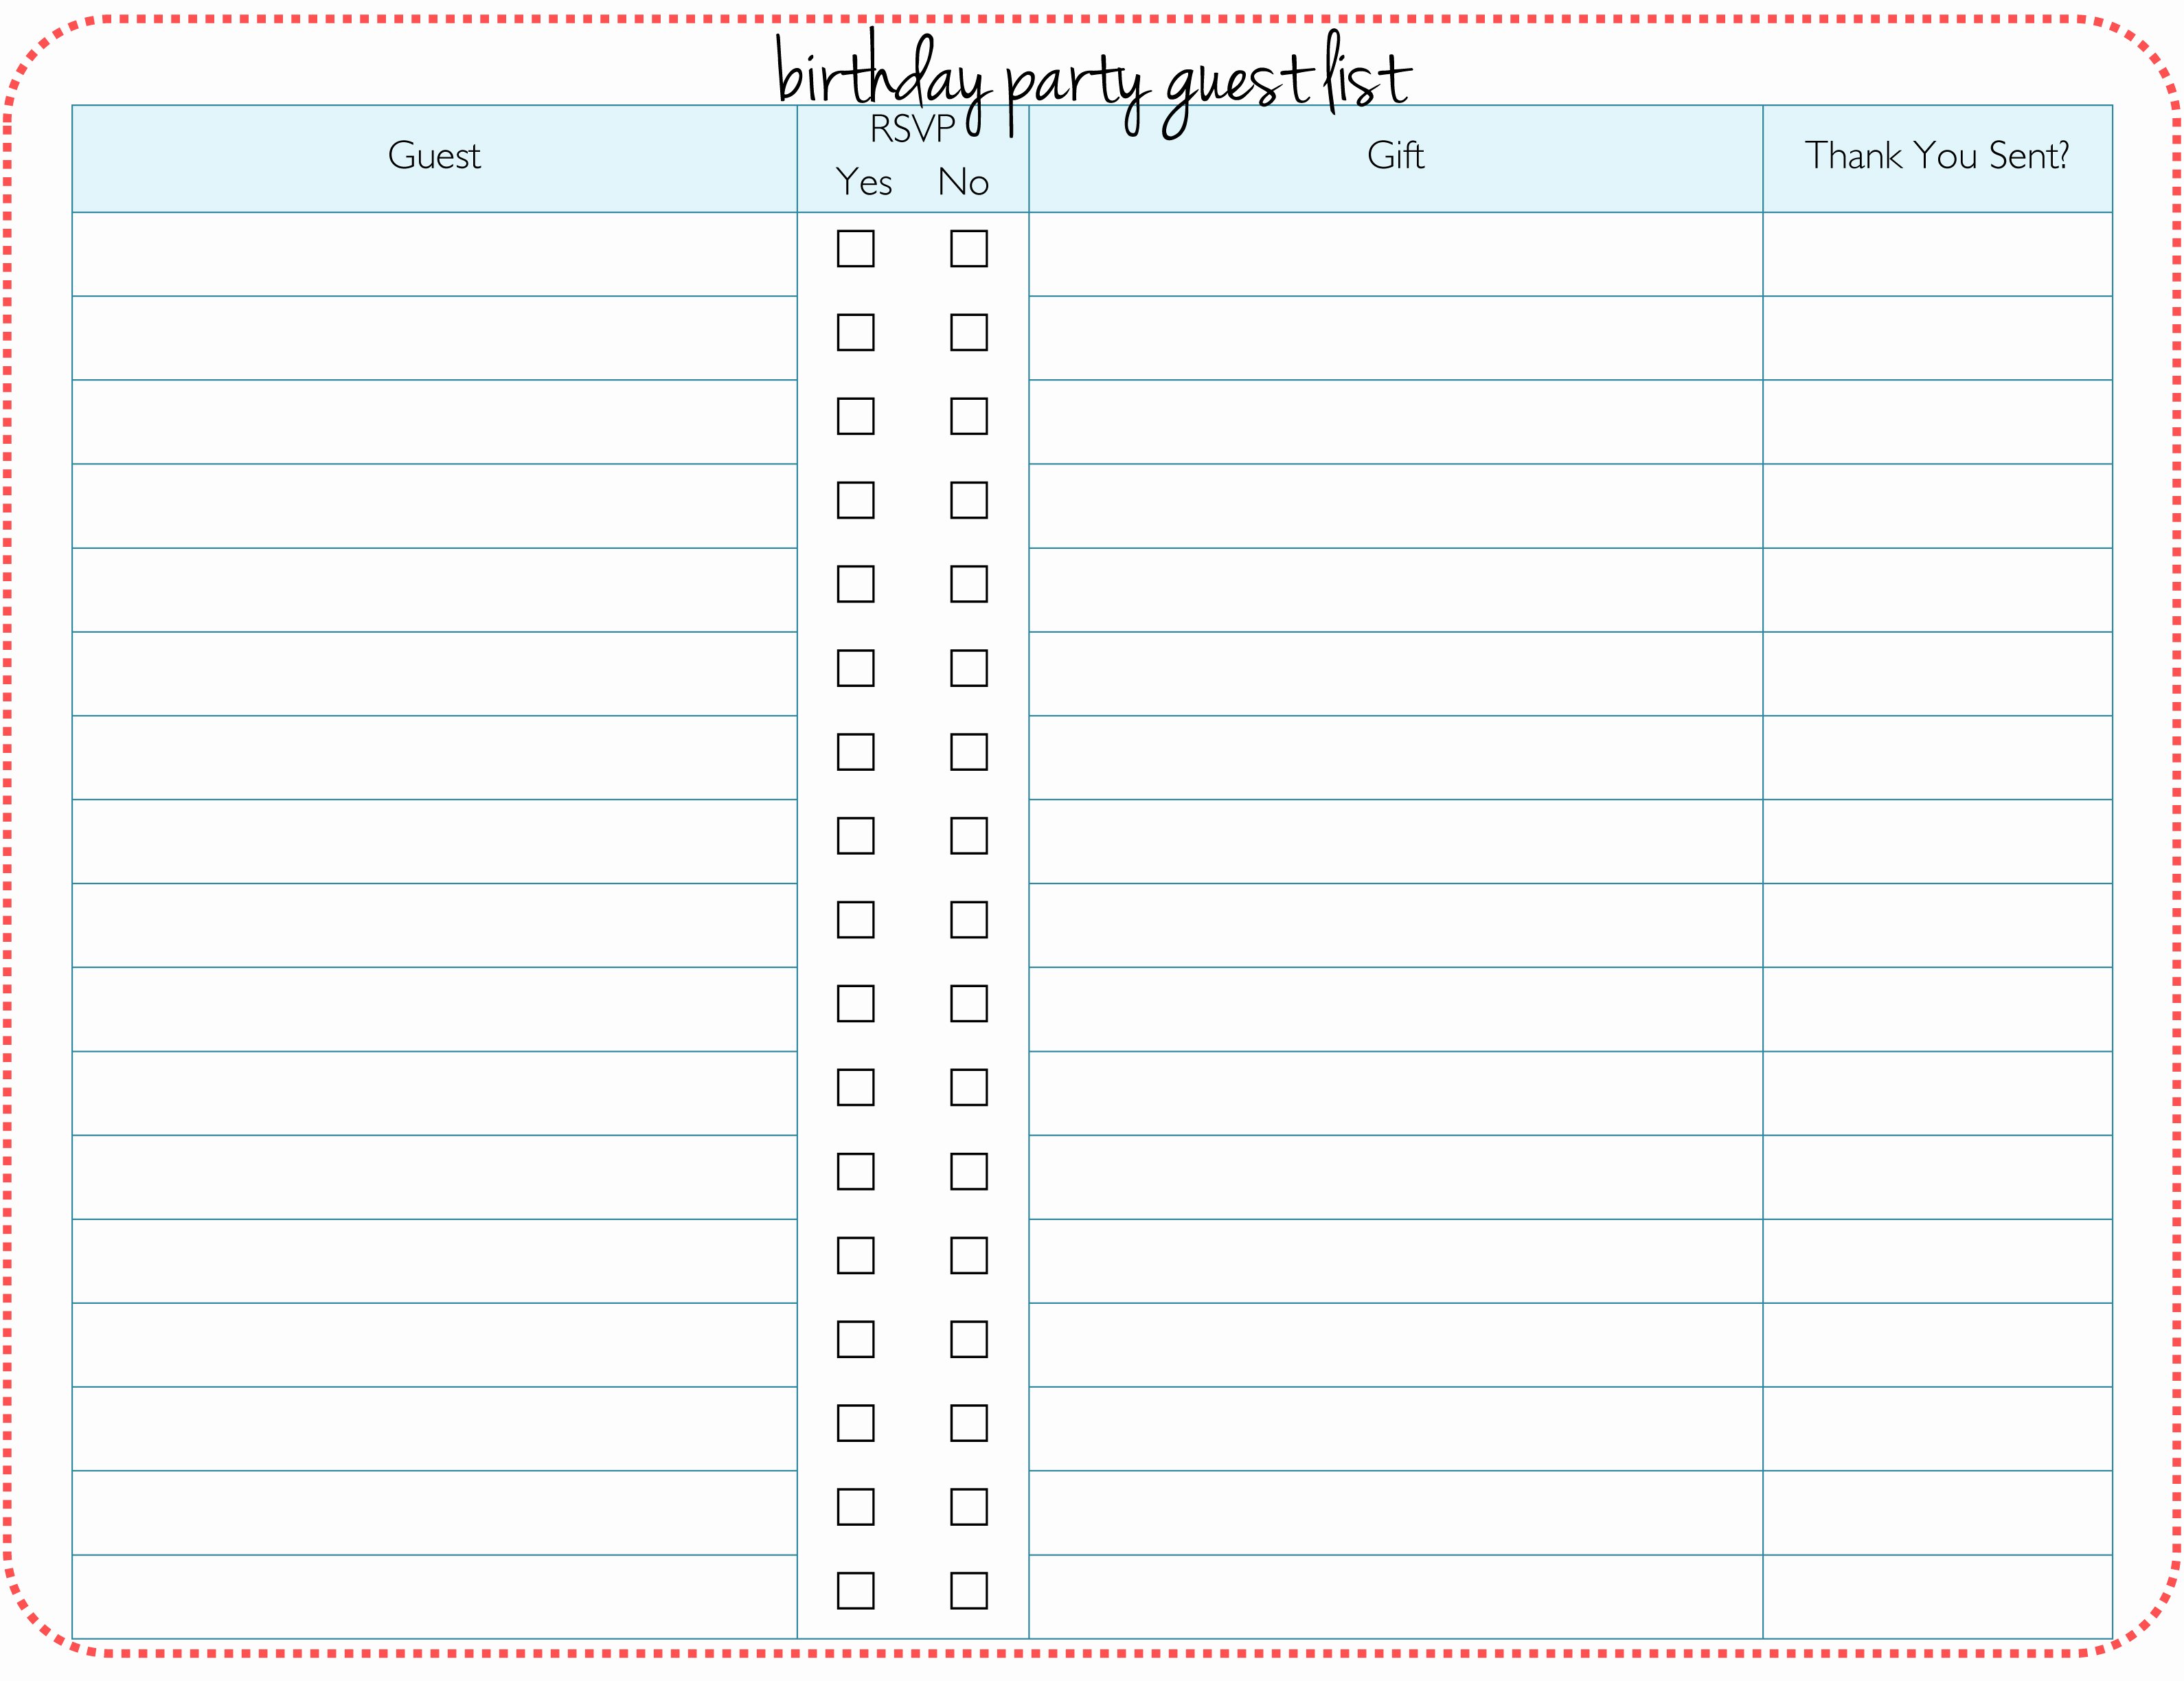 Party Guest List Template Unique Birthday Party Planners Household organization Binder